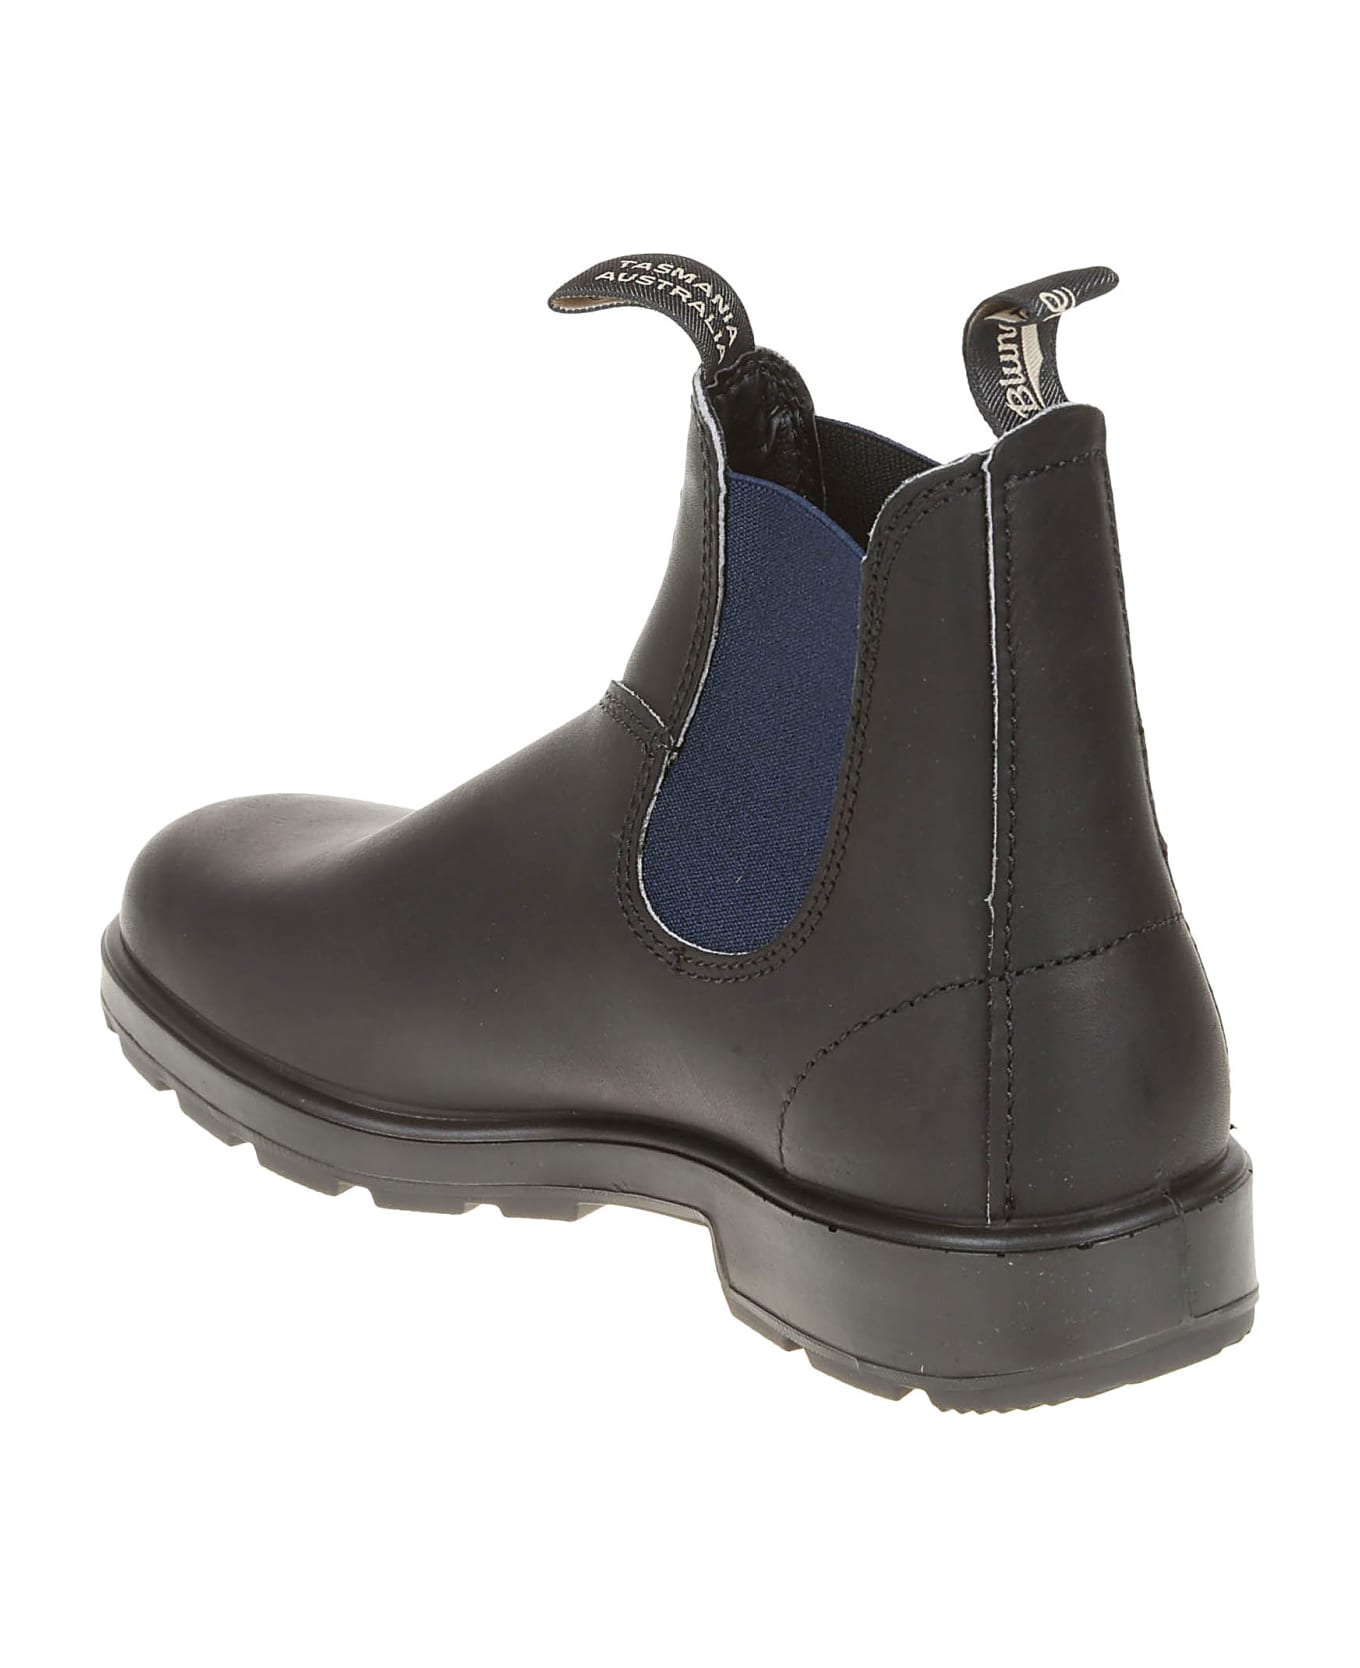 Blundstone Colored Elastic Sided Boots - Black/Navy